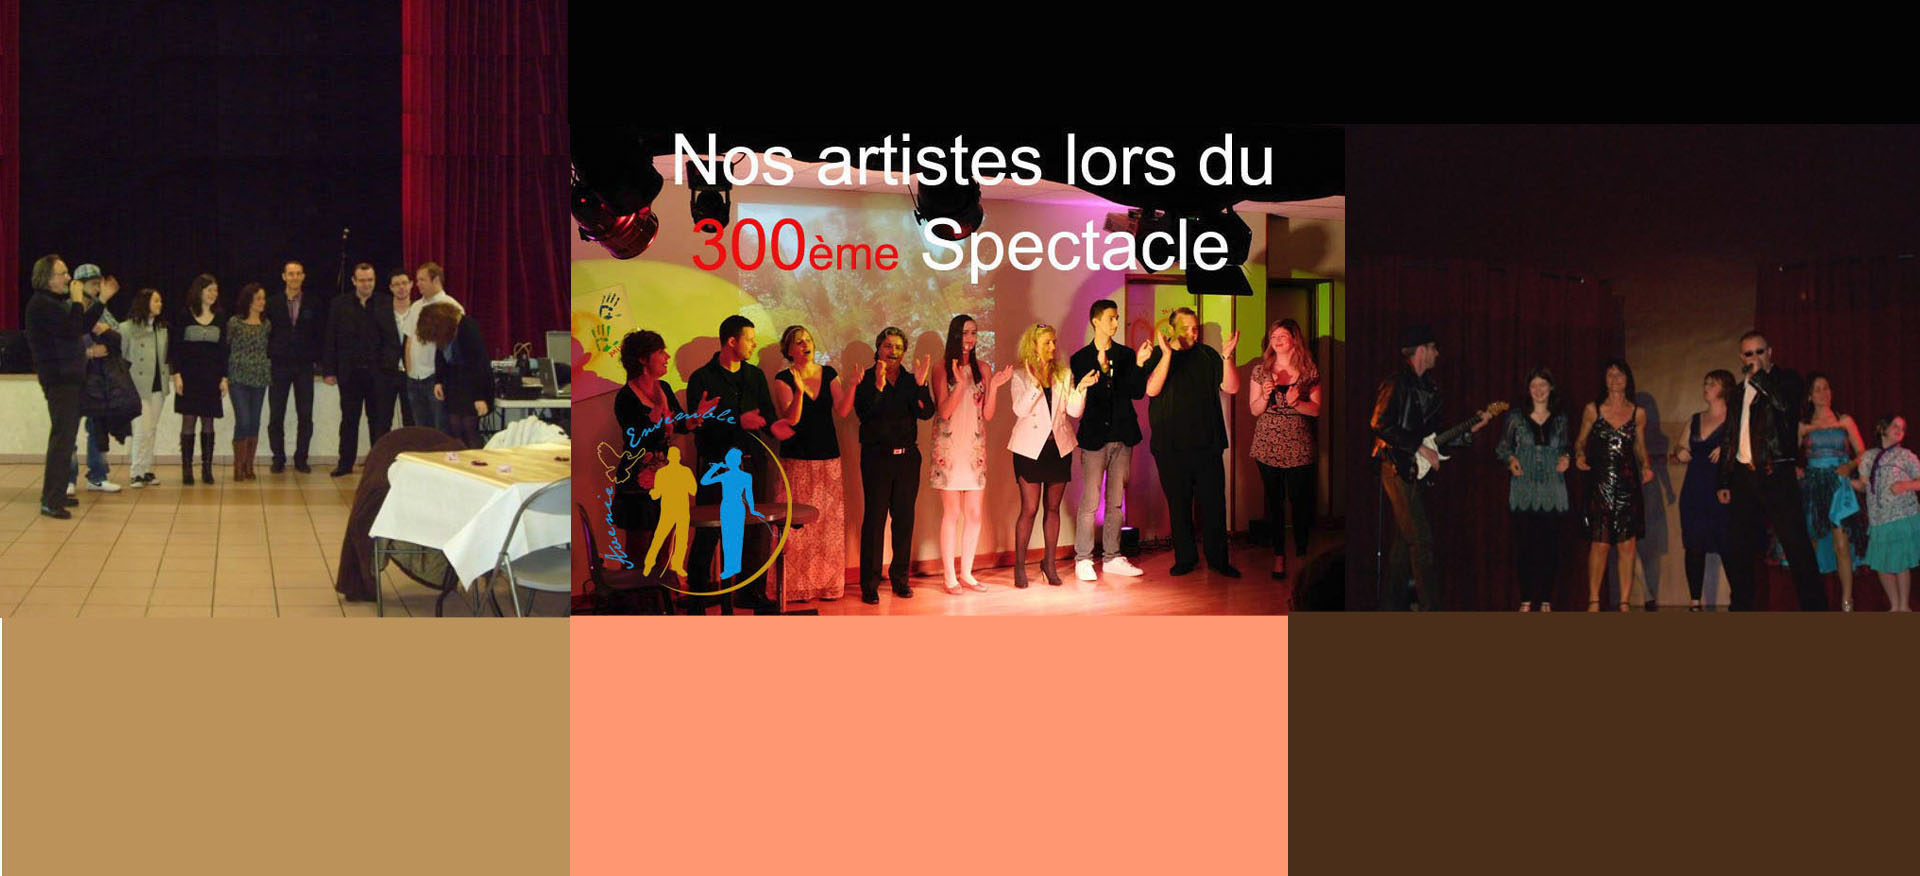 Notre spectacle